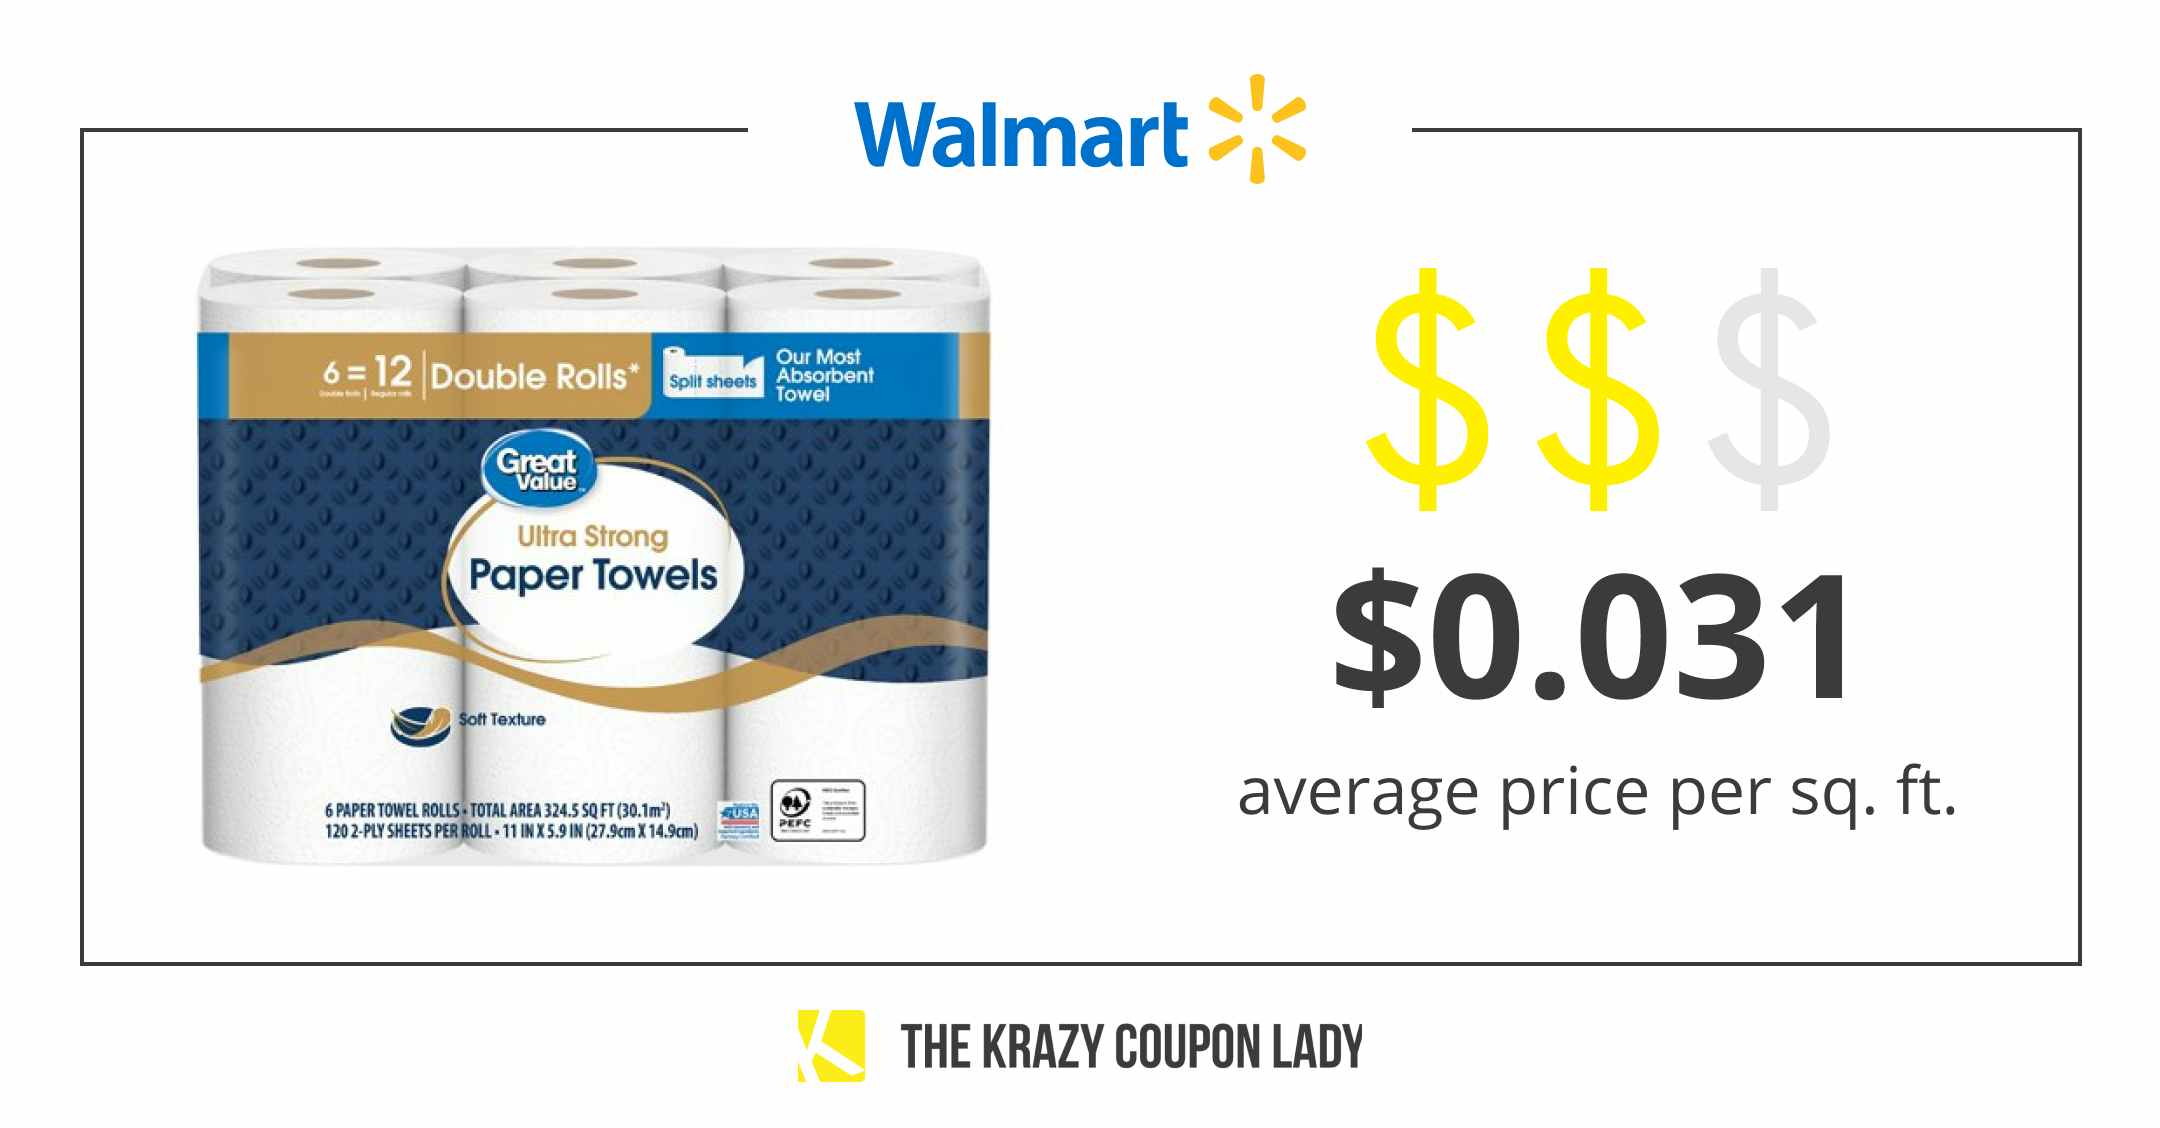 walmart great value paper towels average price per square foot graphic